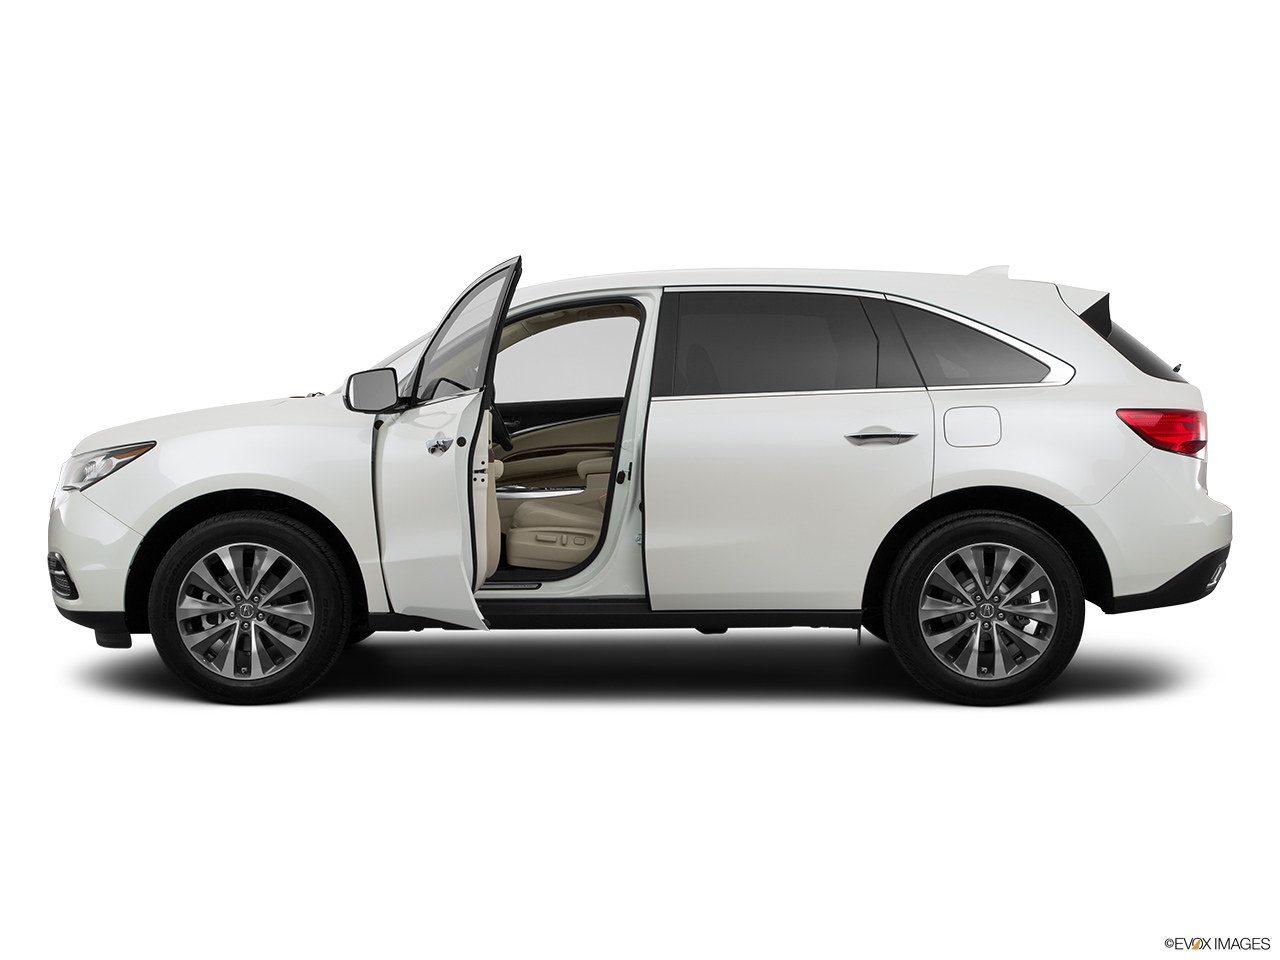 2016 Acura MDX SH-AWD Driver's side profile with drivers side door open. 